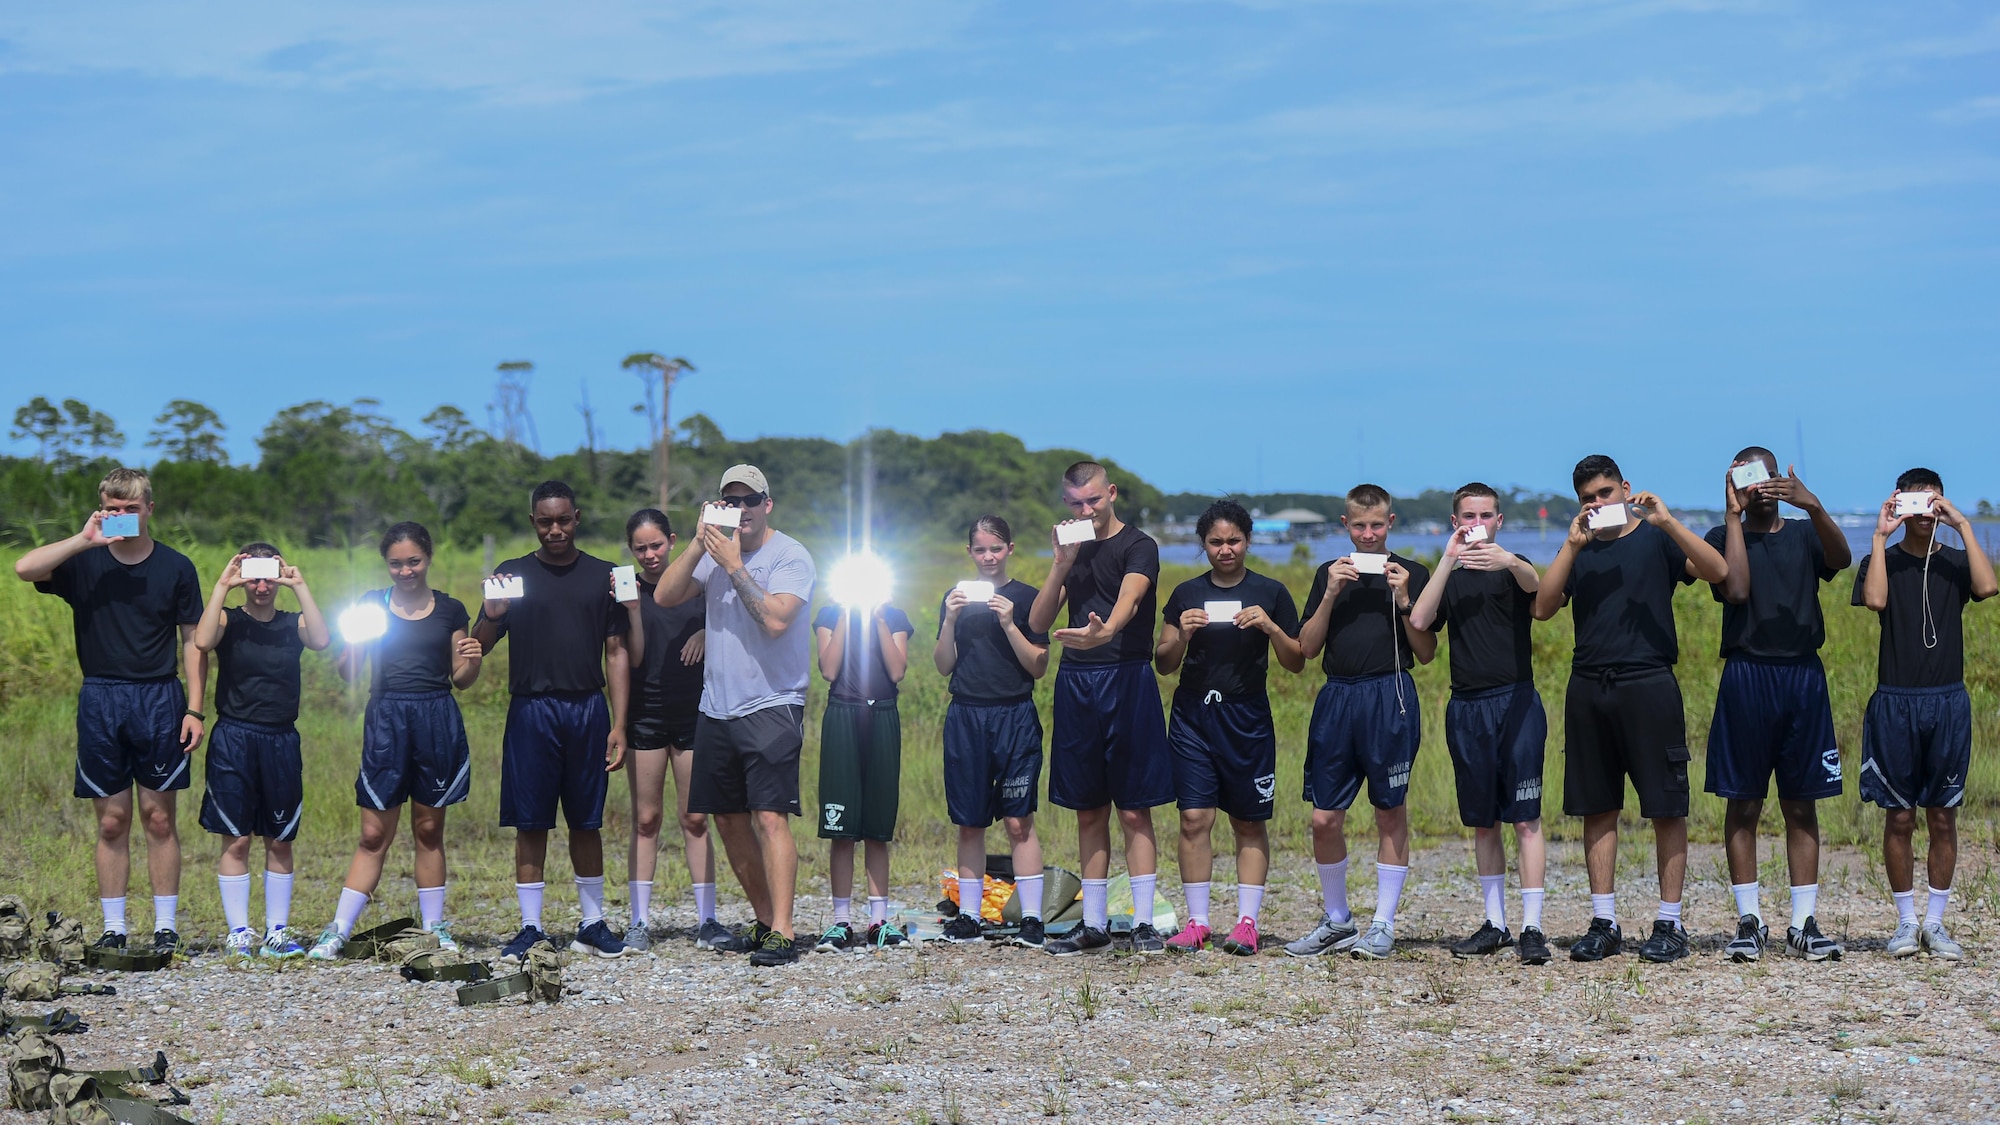 Junior ROTC cadets practice mirror signaling during survival, evasion, resistance and escape training at Hurlburt Field, Fla., June 29, 2017. SERE specialists with the 1st Special Operations Support Squadron gave Summer Leadership School cadets a crash course on SERE, including signaling aircraft, starting fires with natural resources, and crafting shelters in the wilderness. (U.S. Air Force photo by Staff Sgt. Victor J. Caputo)